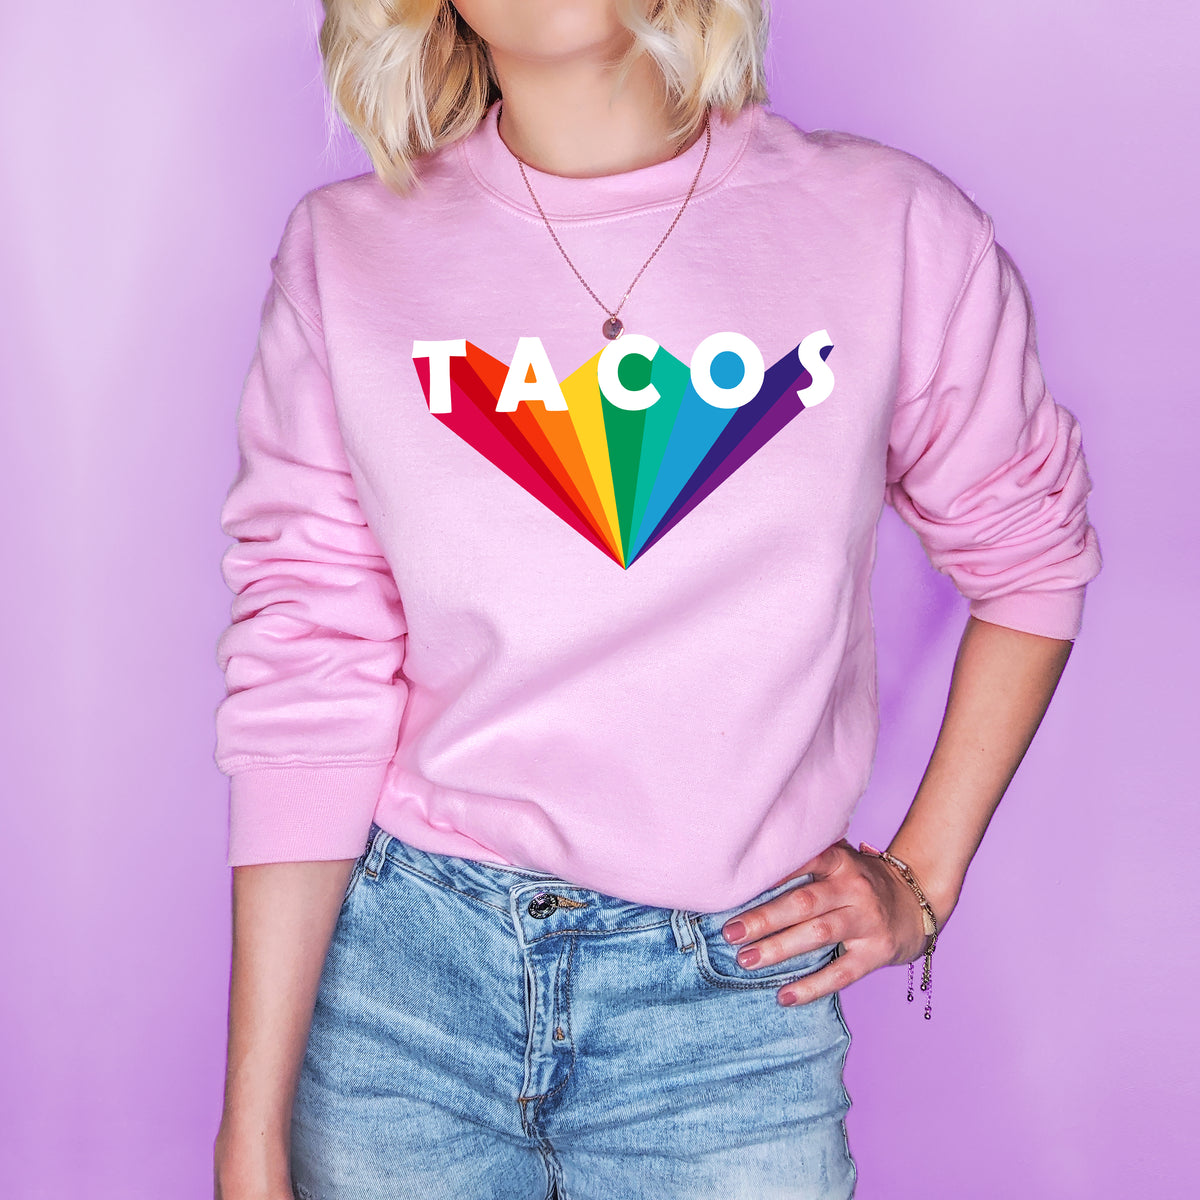 Pink sweatshirt that says tacos in the retro font - HighCiti